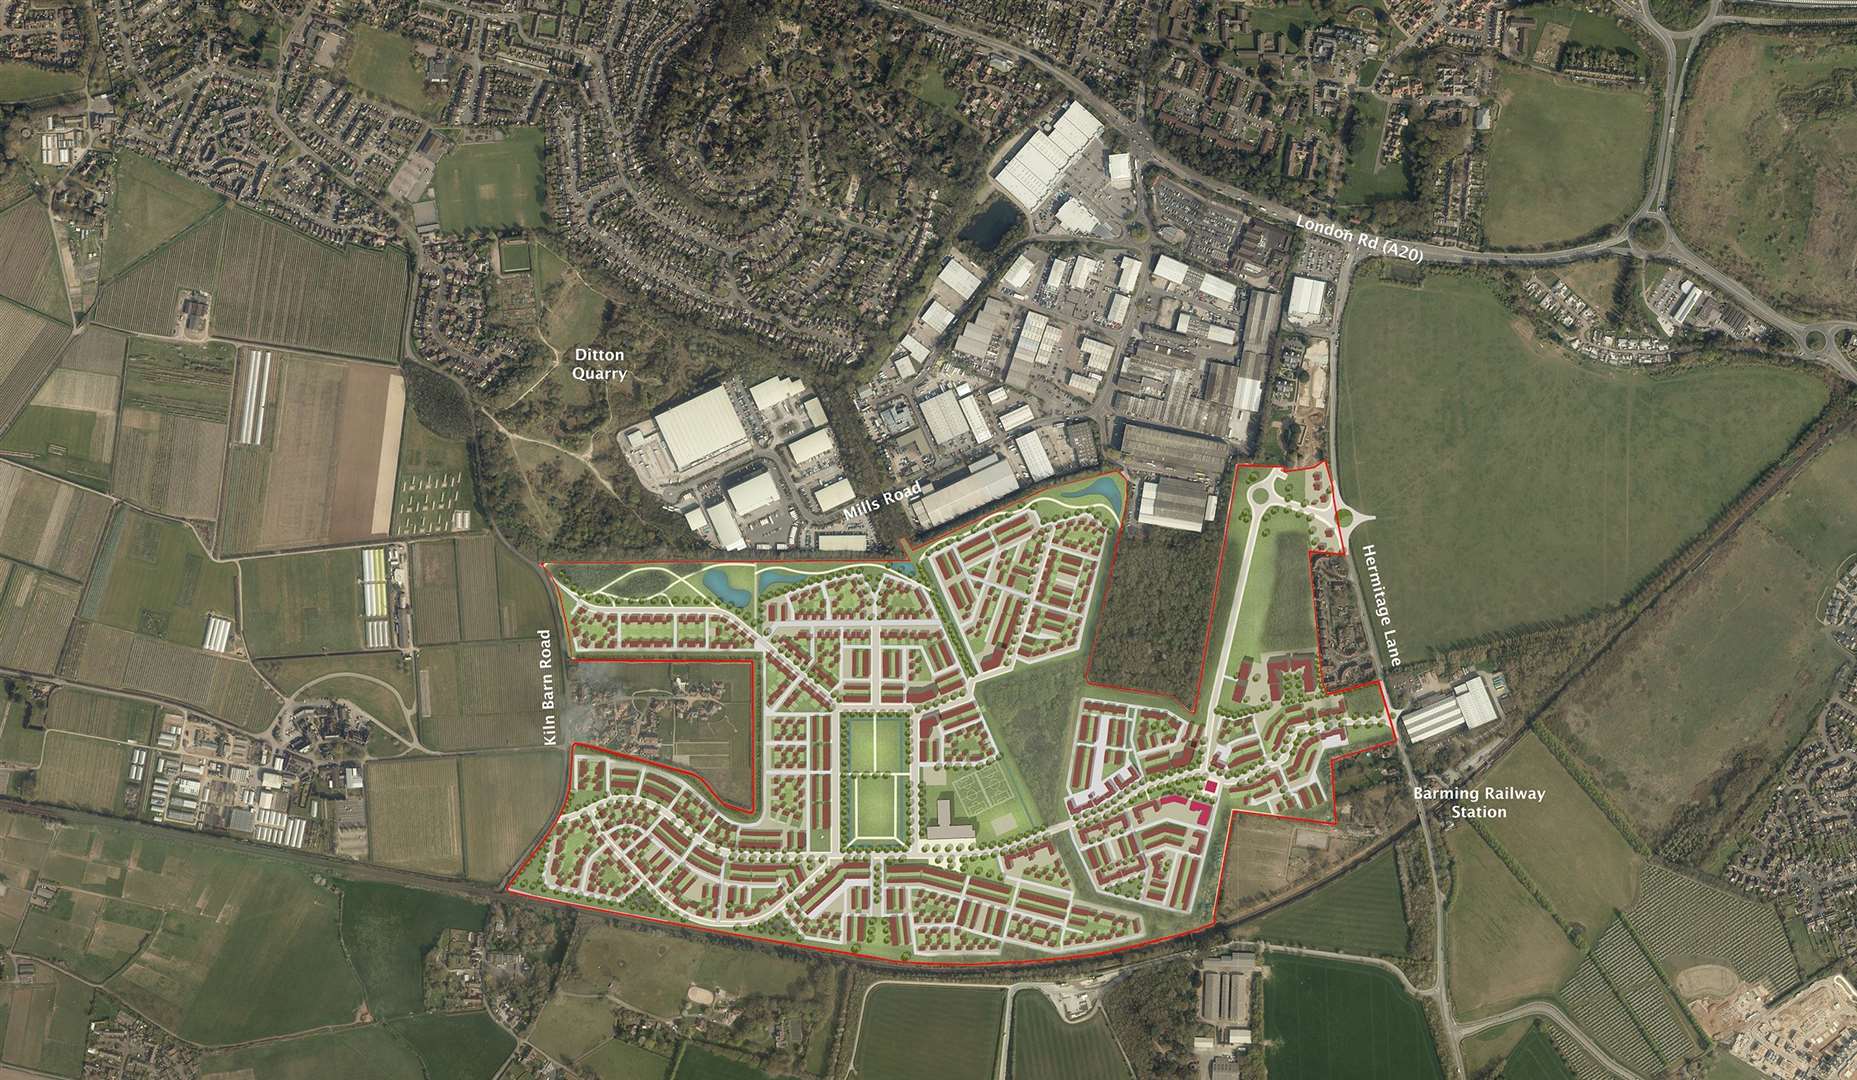 An aerial view of the "masterplan" for the new Bradbourne community